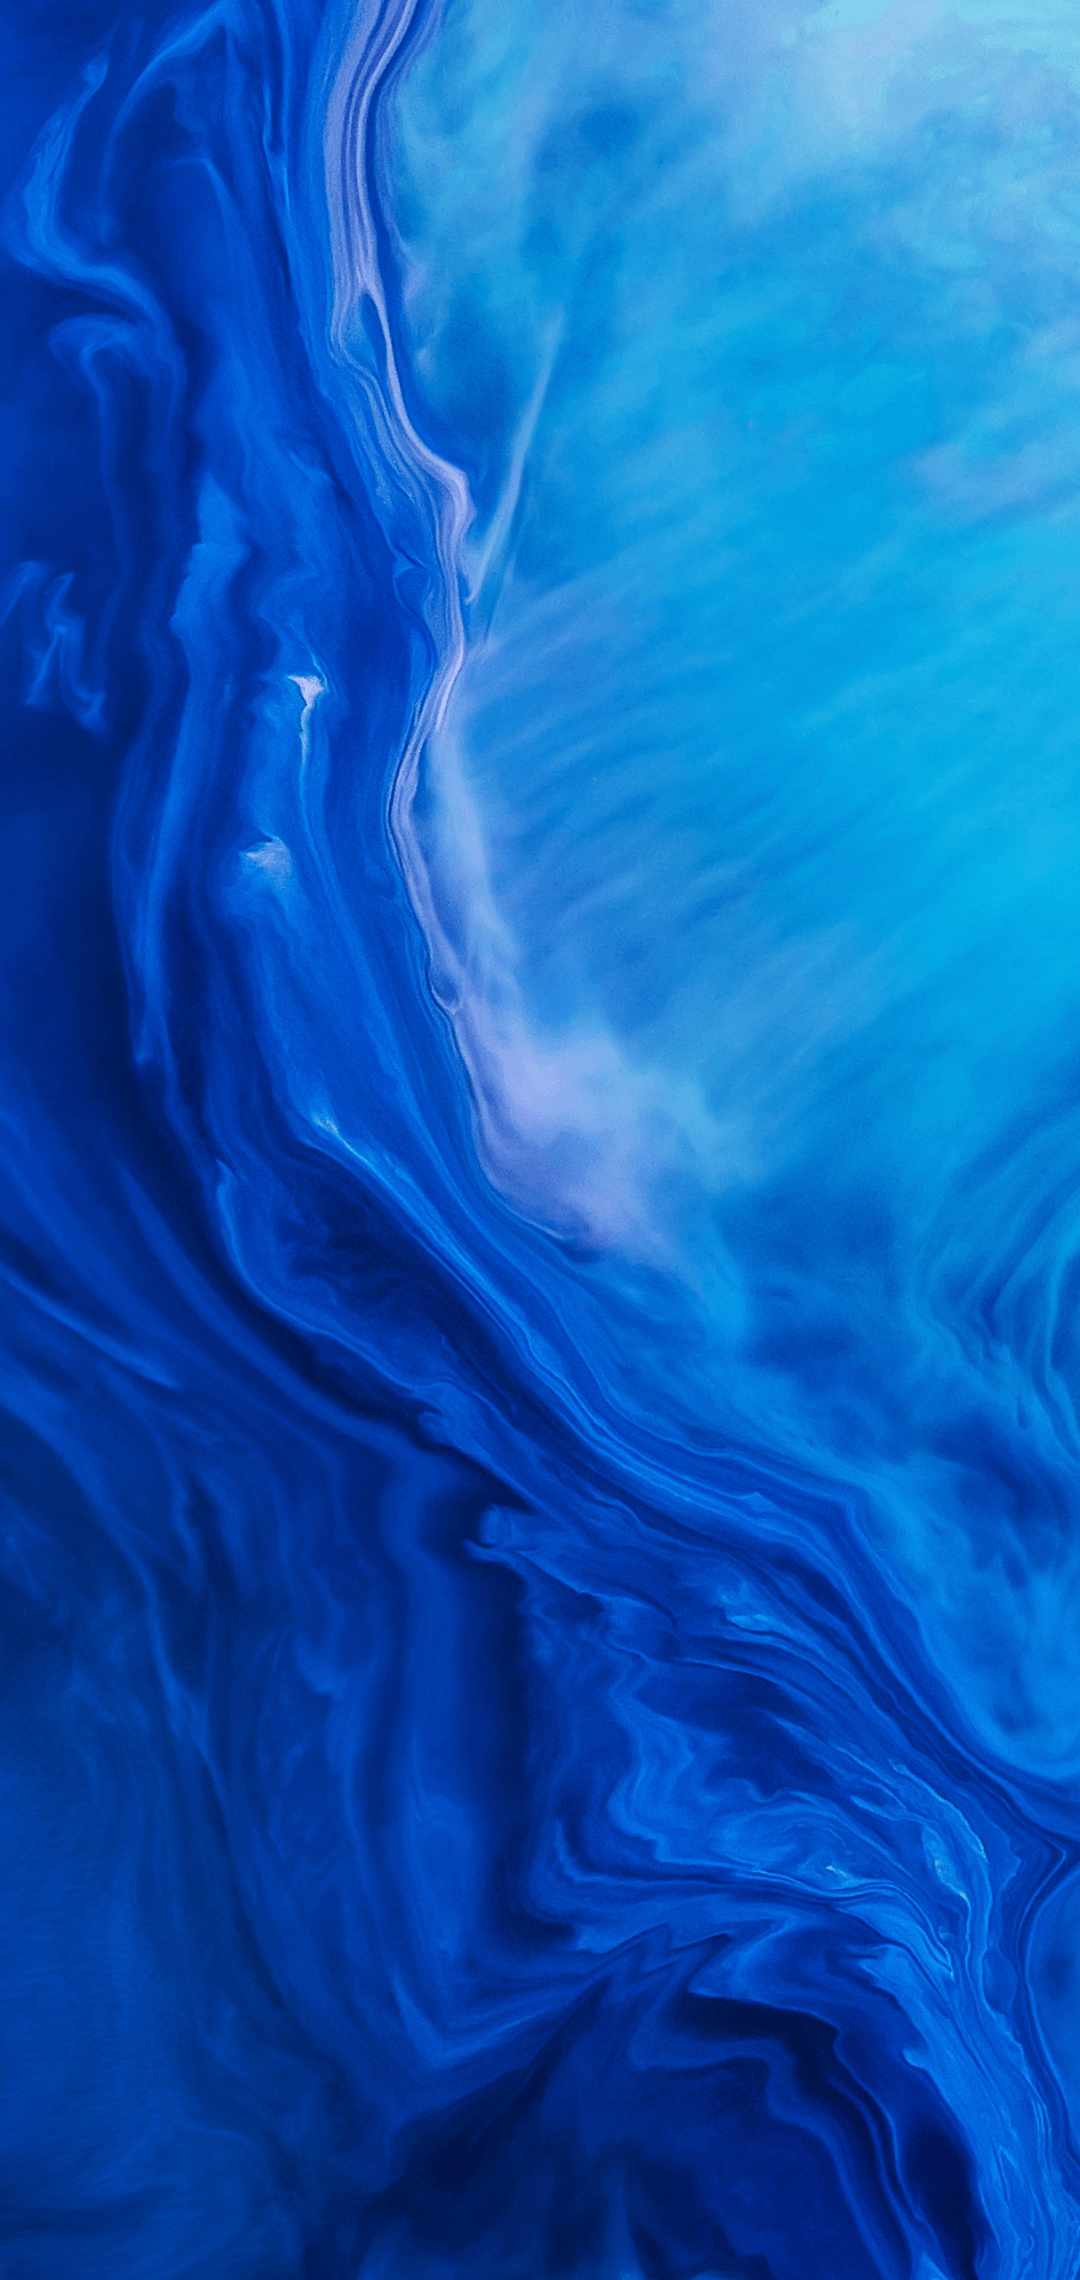 Honor 20 Pro Wallpapers - Top Free Honor 20 Pro Backgrounds ...